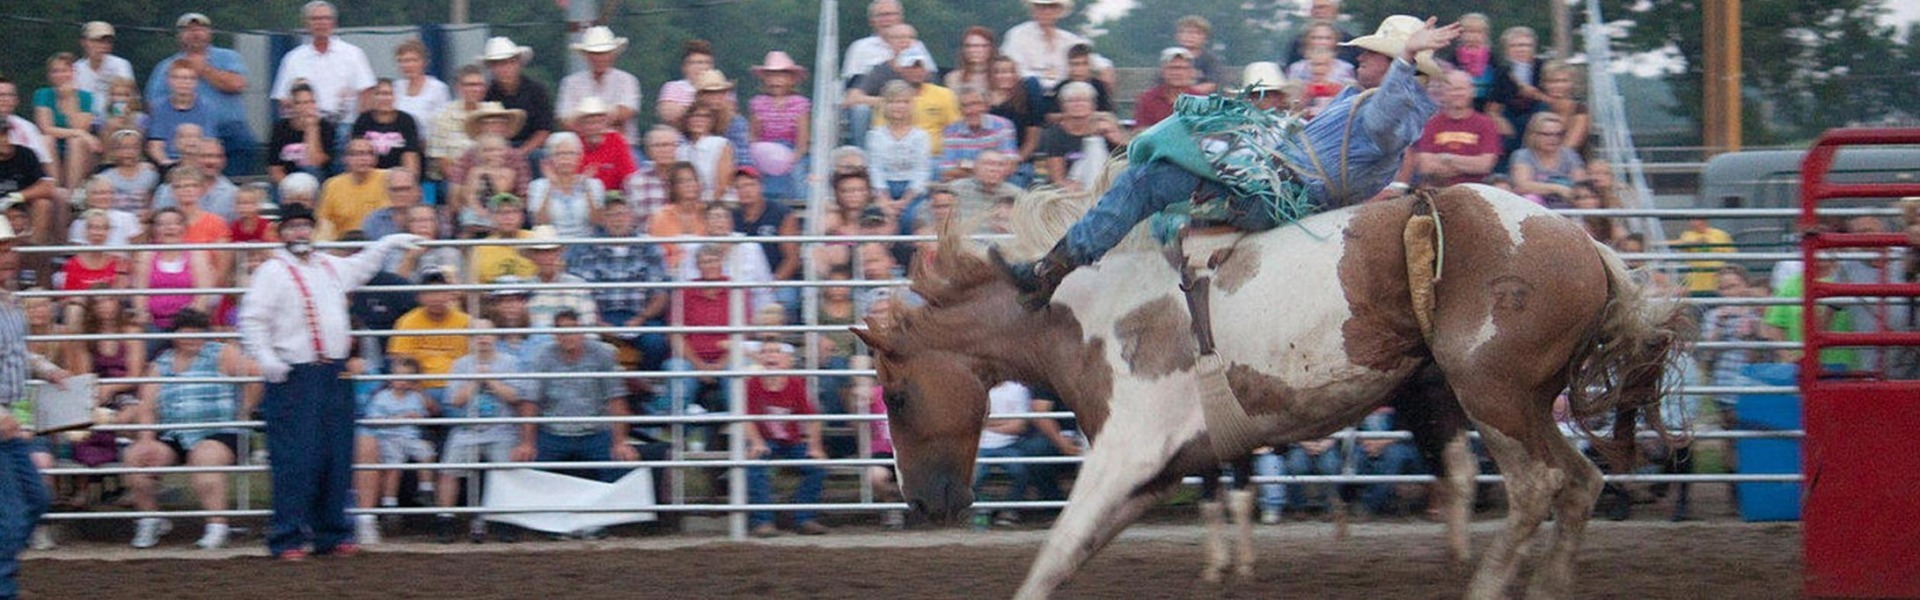 Carson Community Rodeo July 30 August 1, 2020 Unleash Council Bluffs